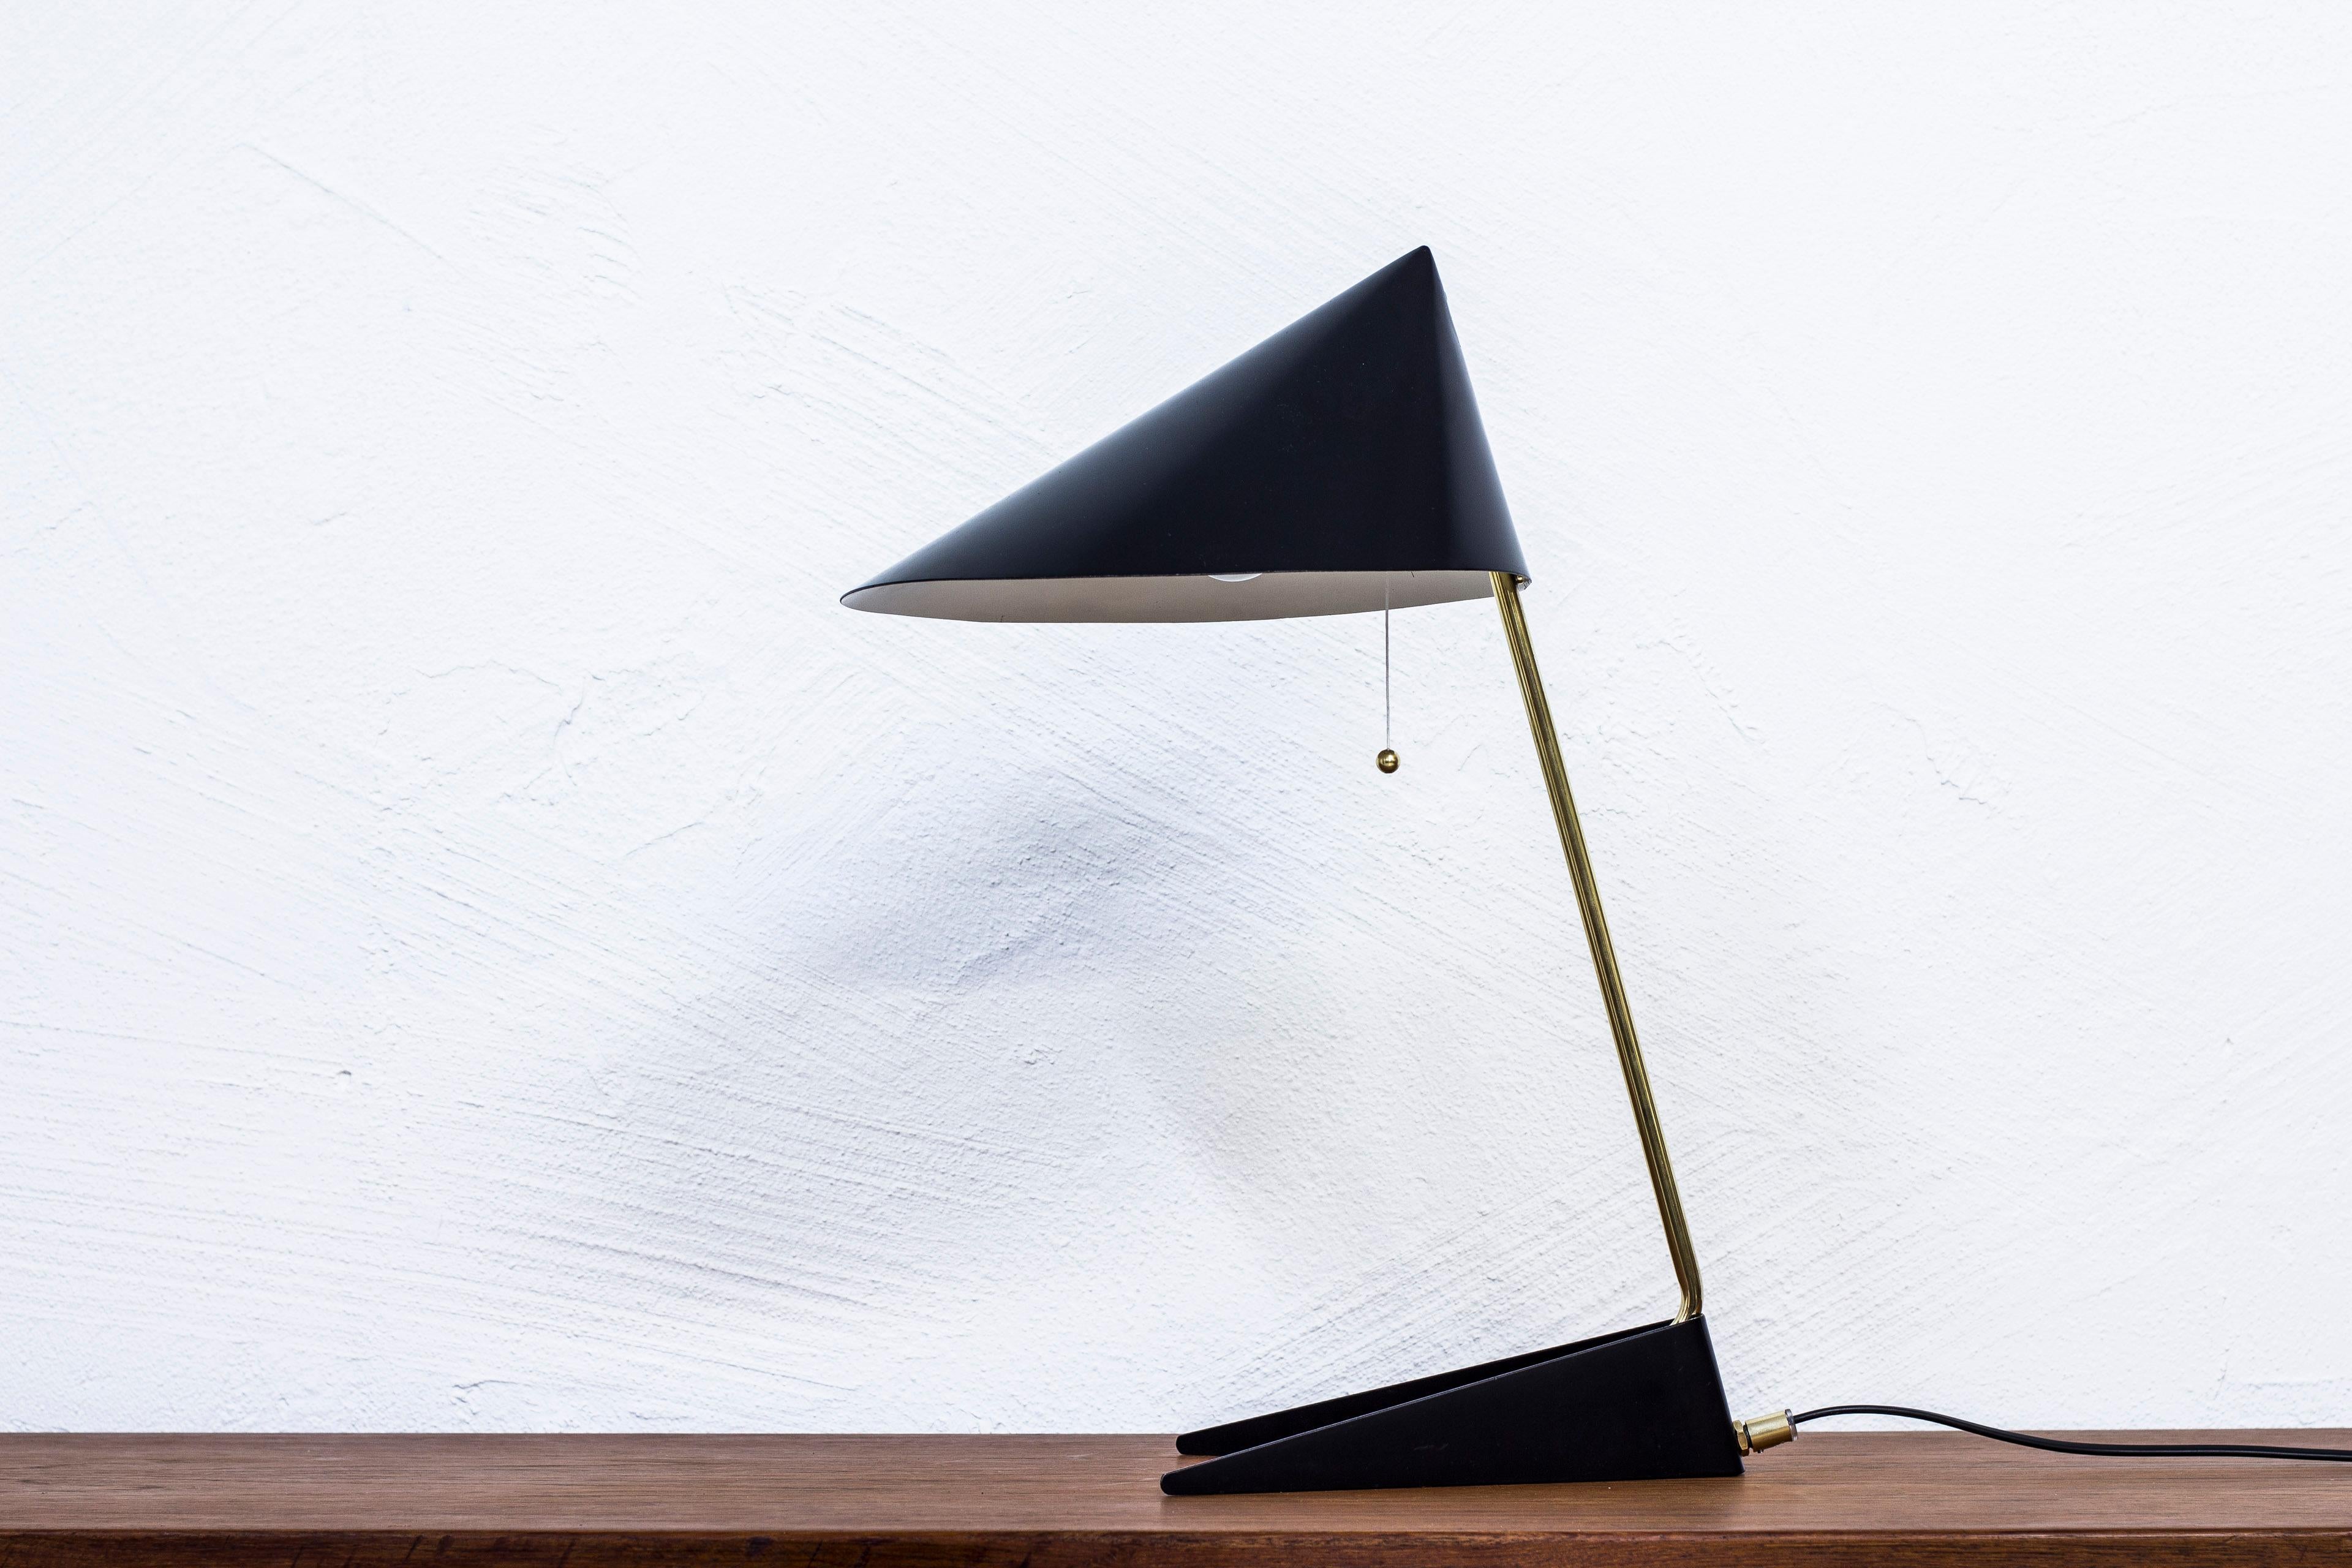 Very rare table lamp designed by Svend Aage Holm Sørensen in 1954 for RAAK Amsterdam. This version produced on license for Swedish company ASEA in the second half of the 1950s. Polished brass with lacquered metal shades. String light switch with